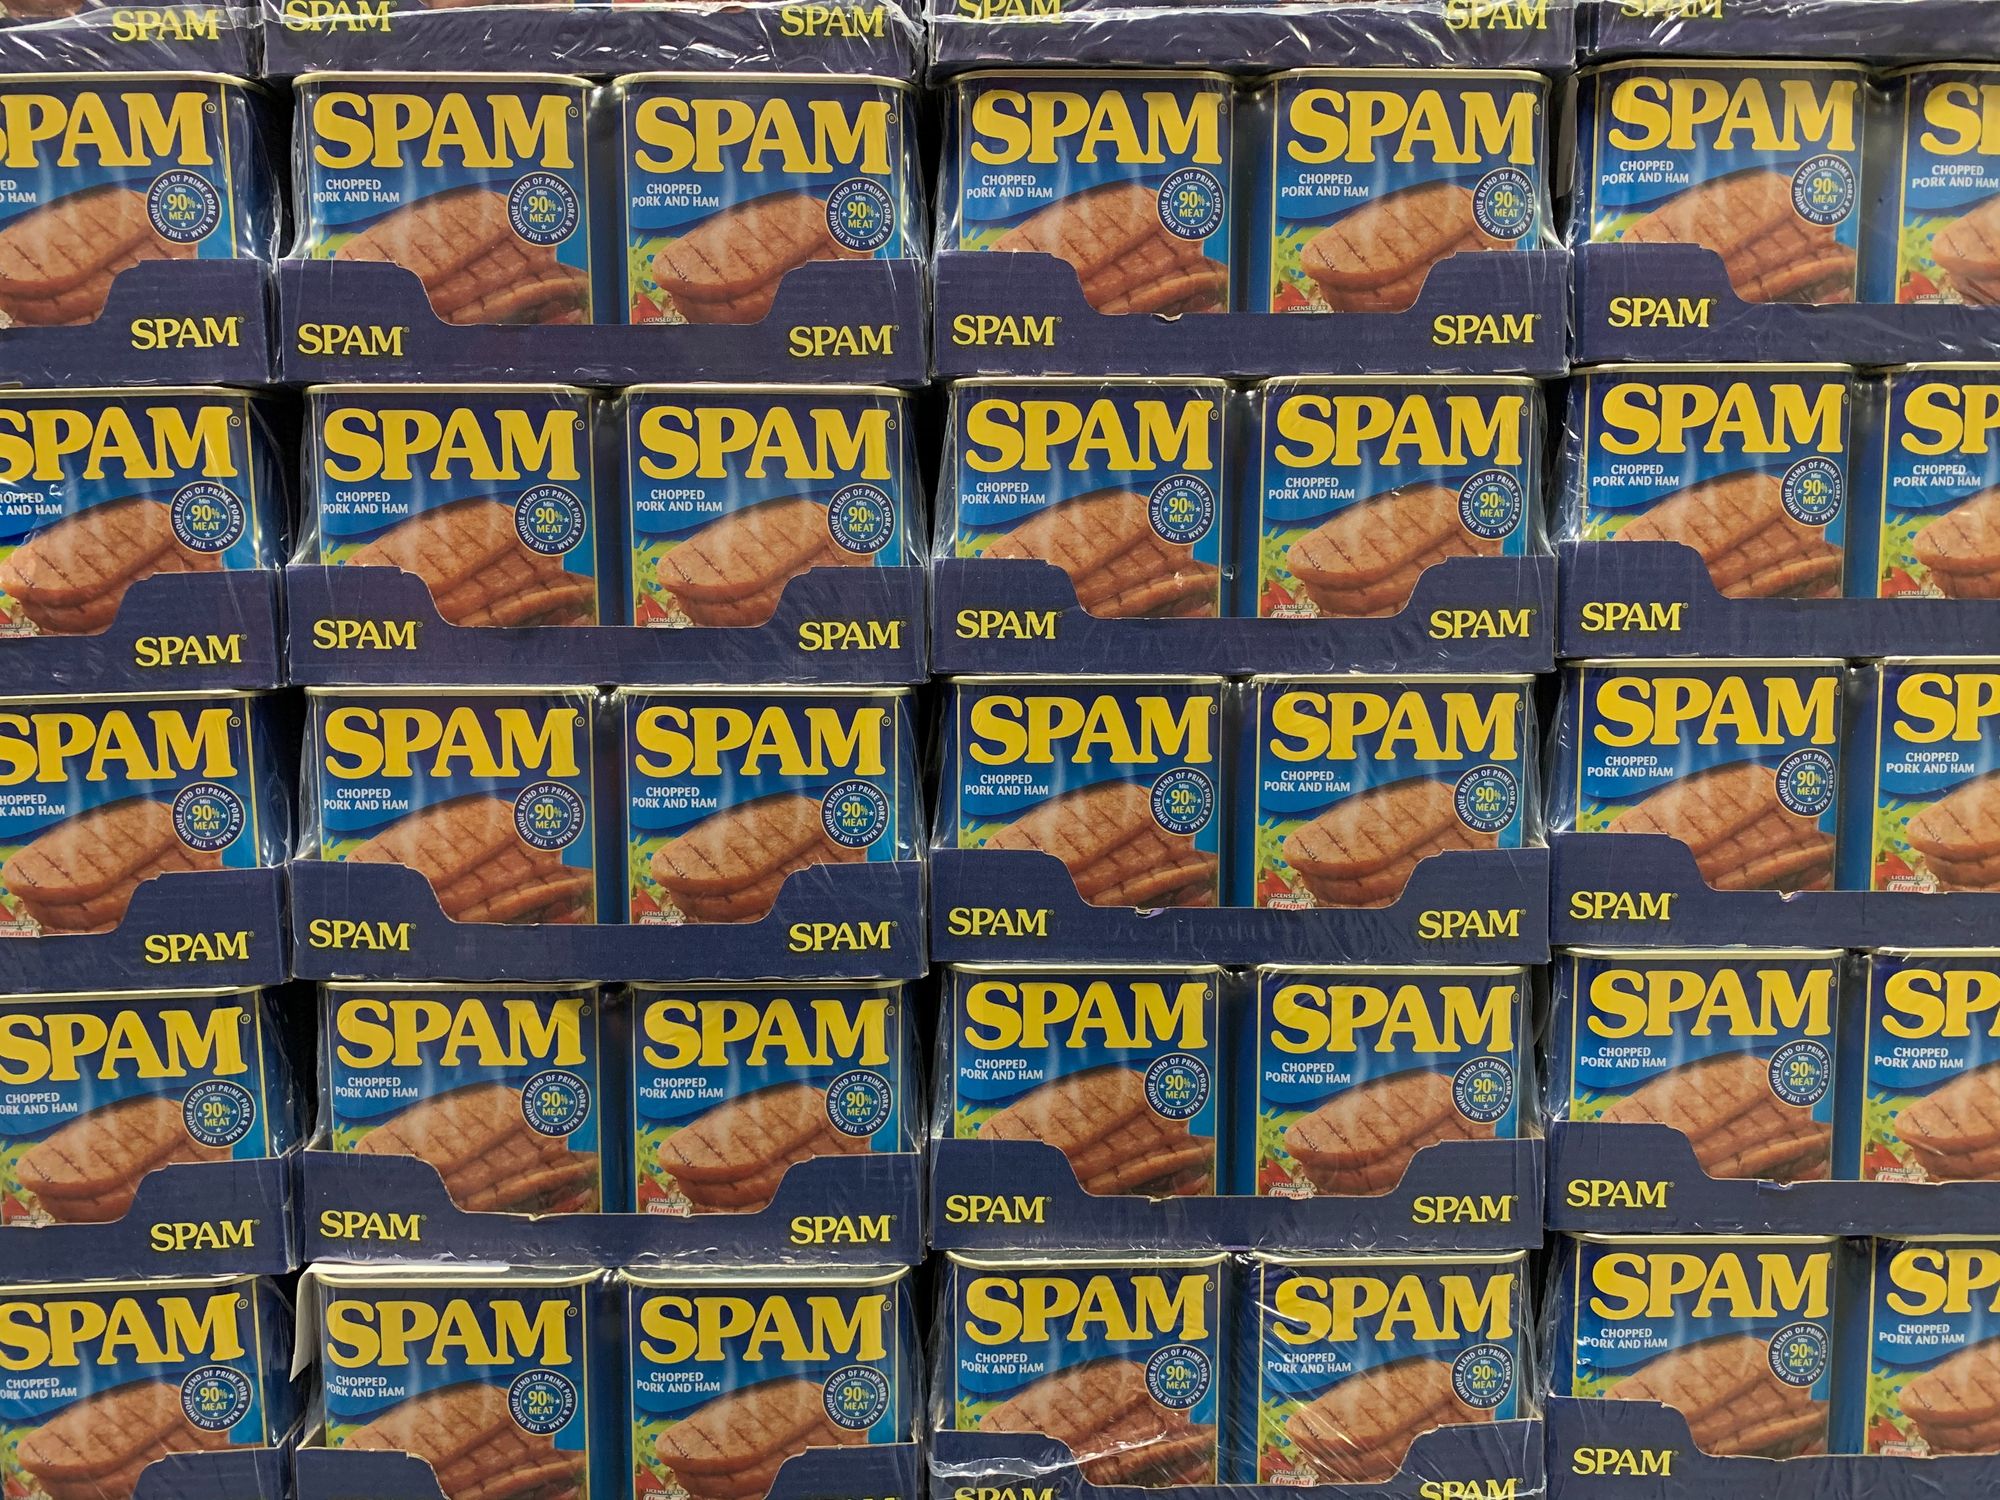 Stacked crates of SPAM containers.